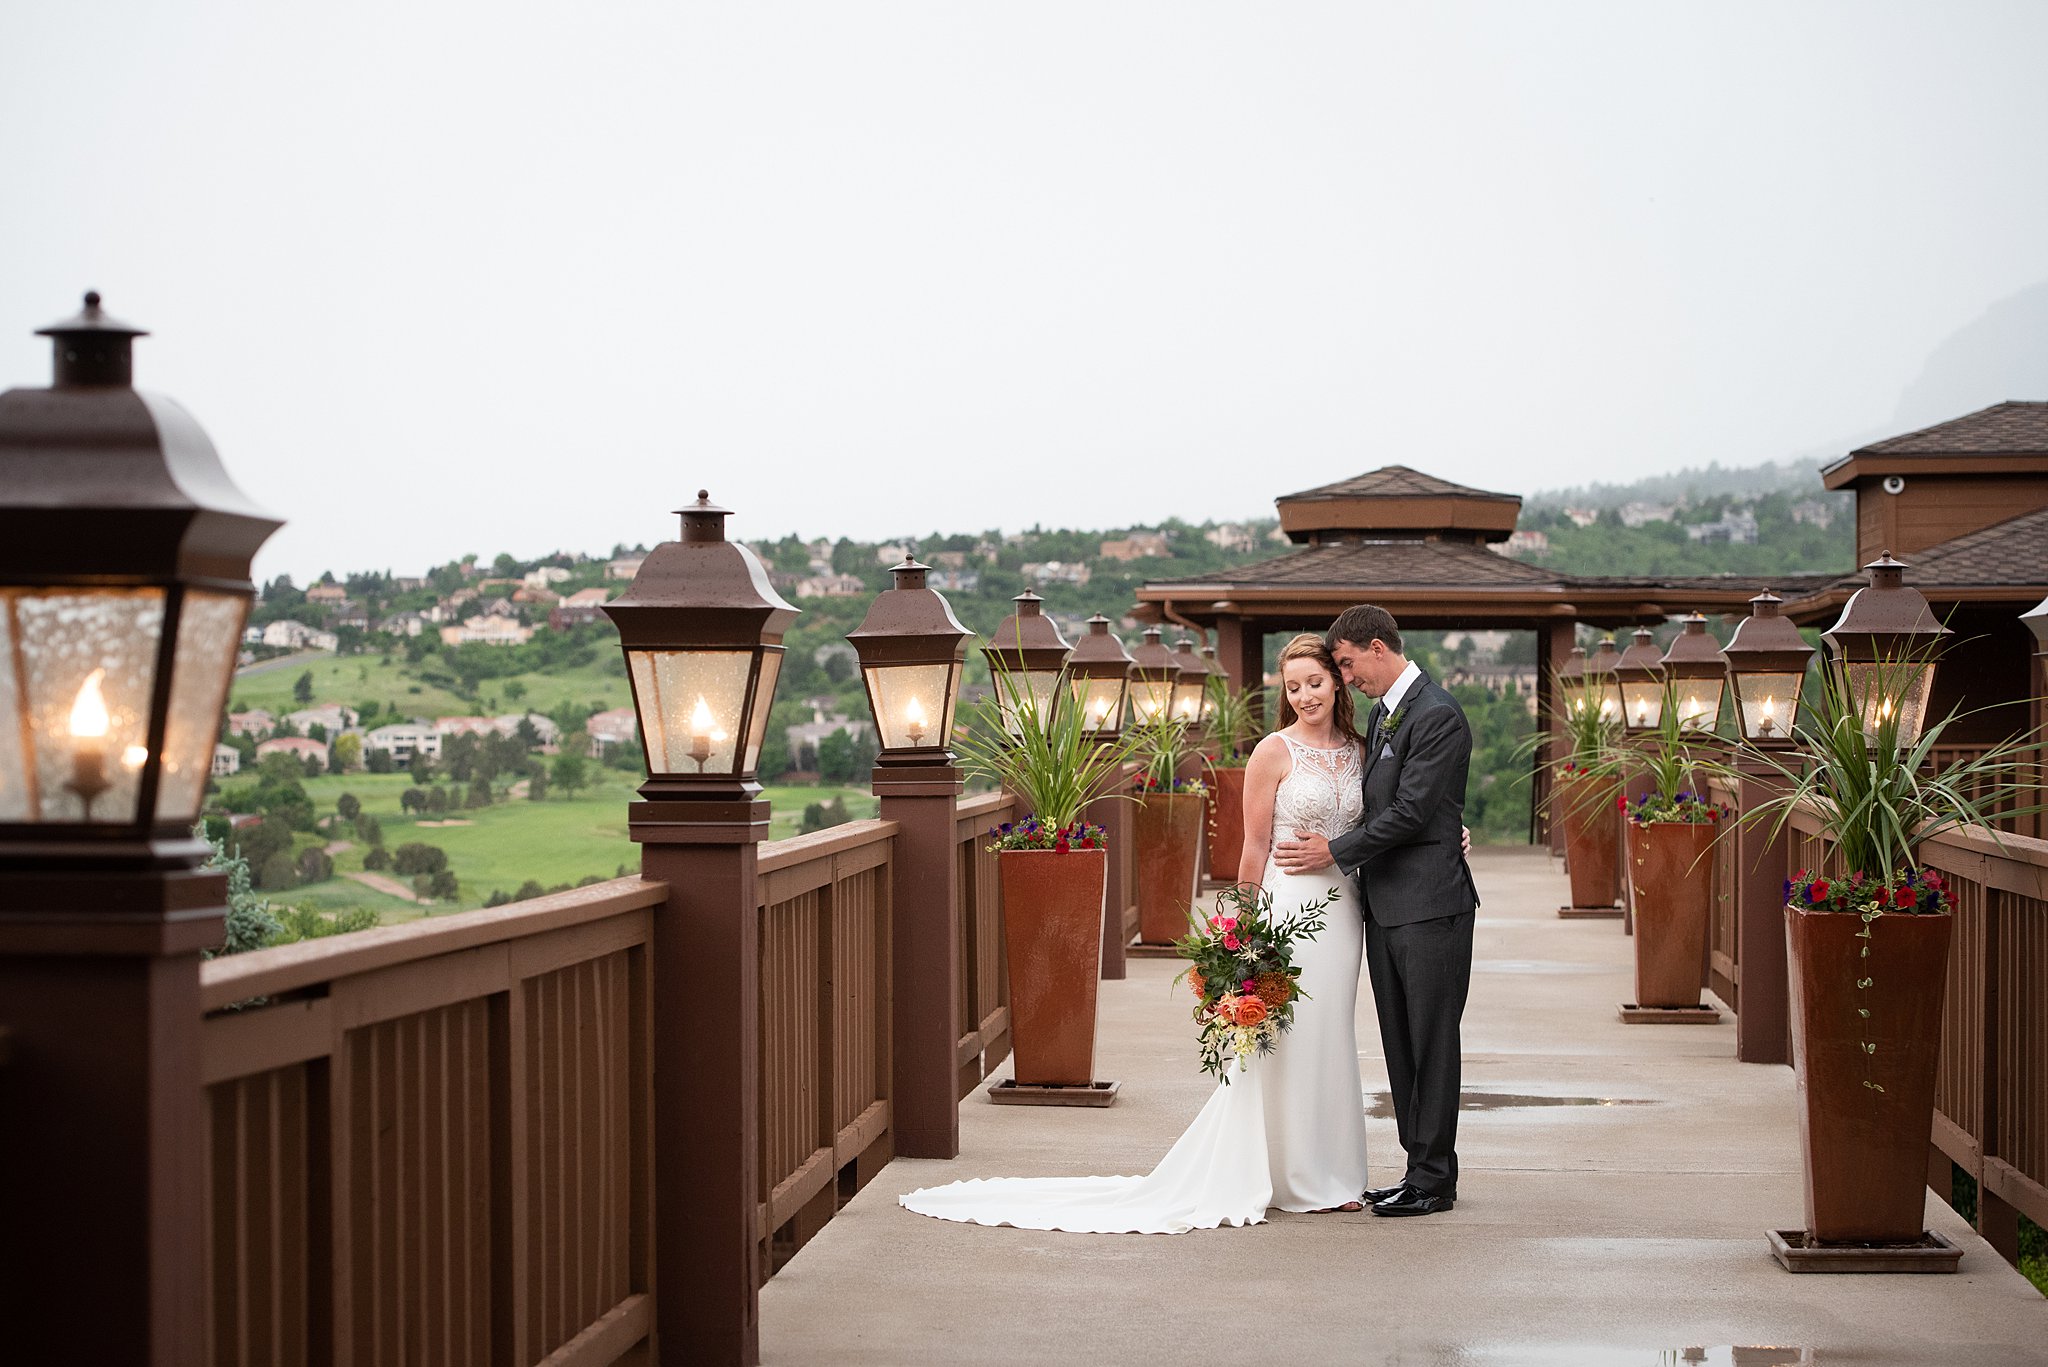 Newlyweds snuggle while standing on a large walkway in the mountains